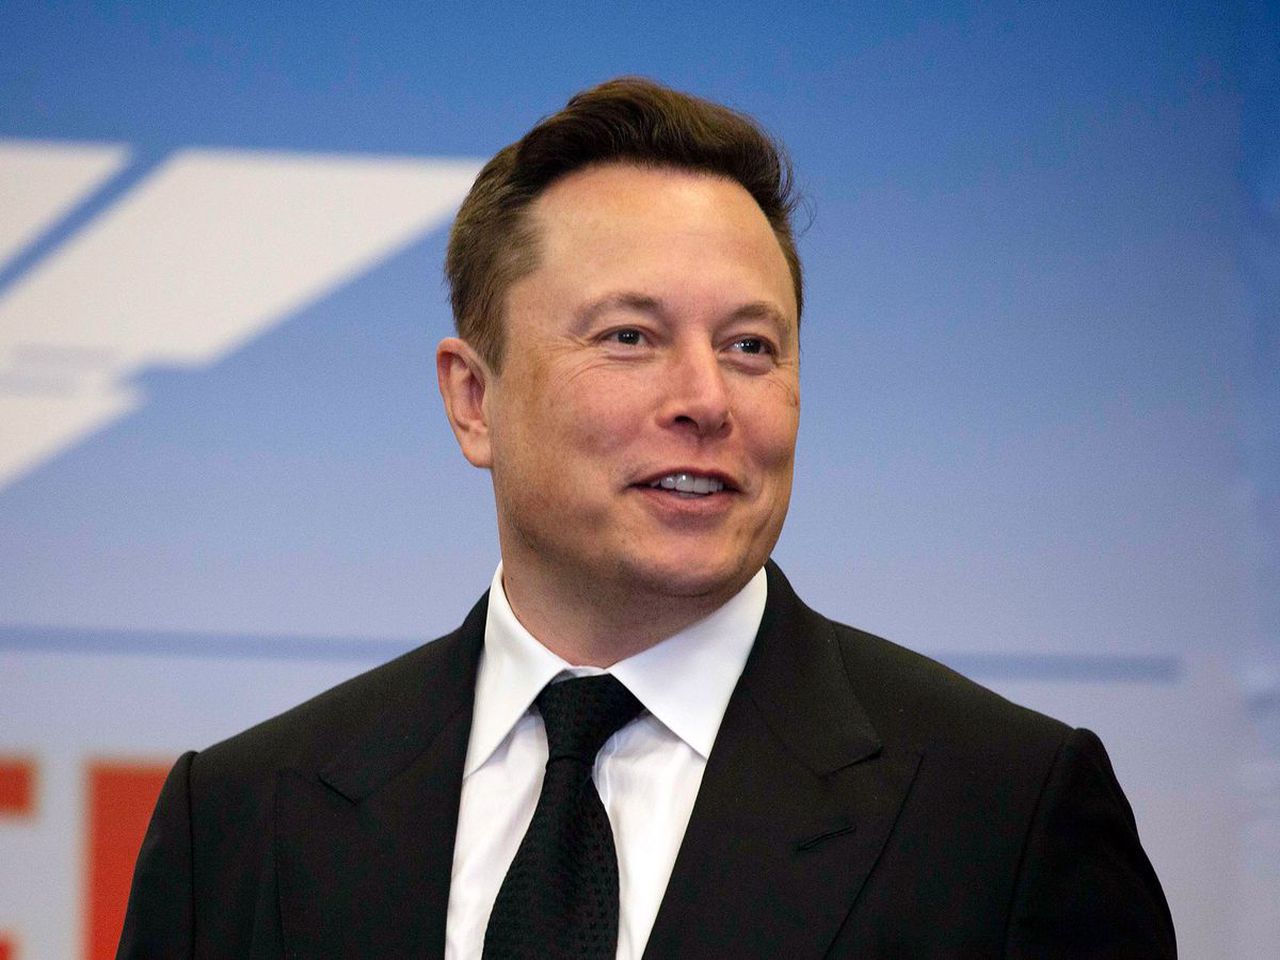 Elon Musk Gains $8 Billion to Become World’s Fourth-Richest Person